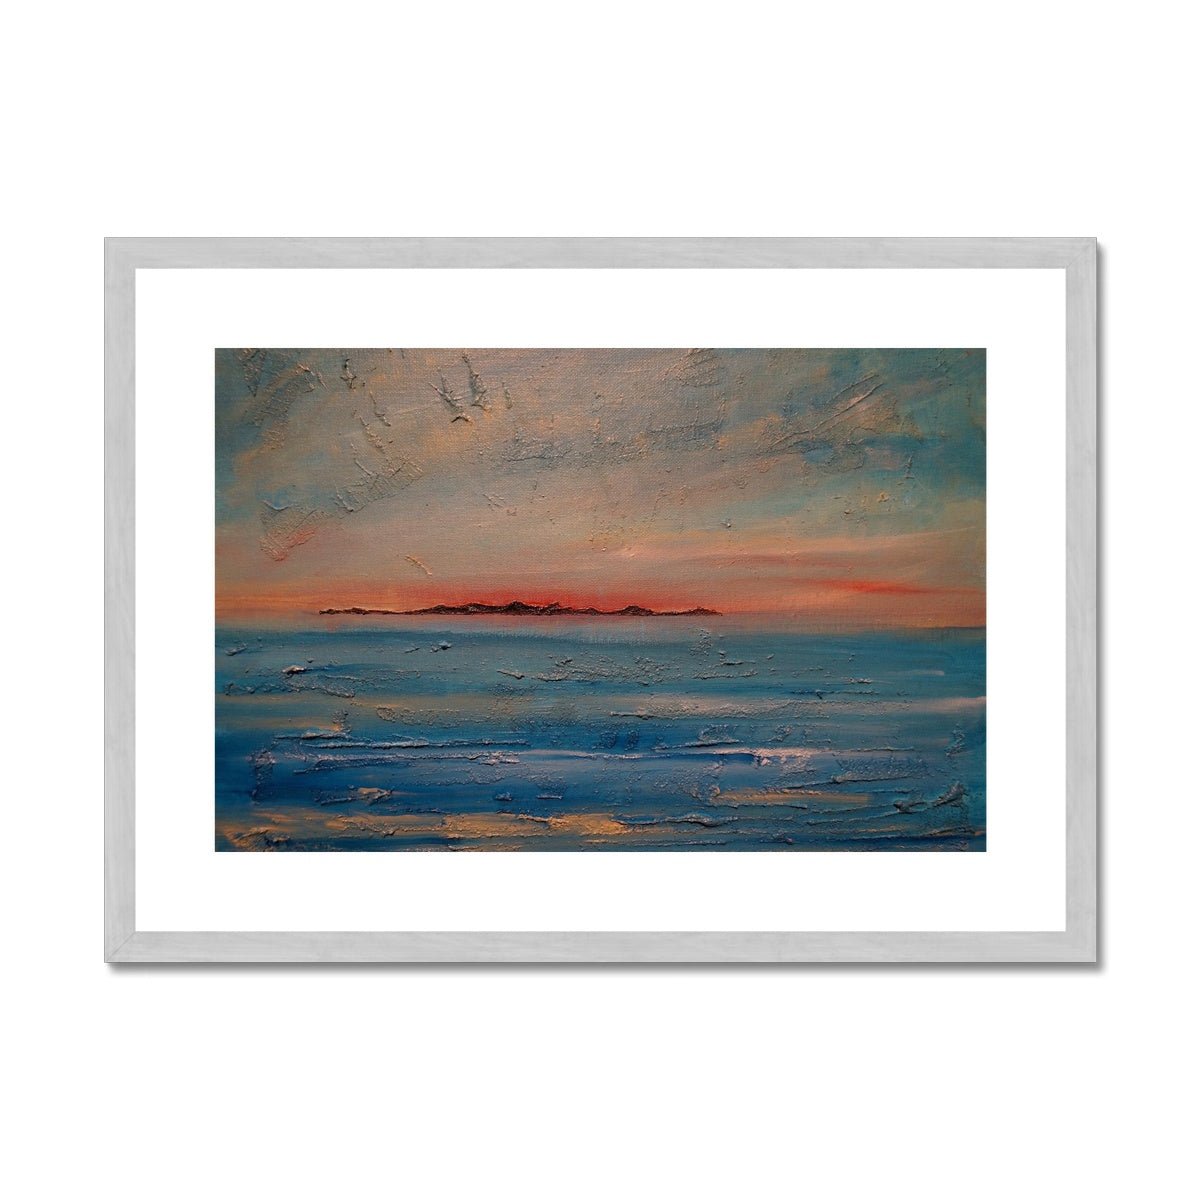 Gigha Sunset Painting | Antique Framed & Mounted Prints From Scotland-Antique Framed & Mounted Prints-Hebridean Islands Art Gallery-A2 Landscape-Silver Frame-Paintings, Prints, Homeware, Art Gifts From Scotland By Scottish Artist Kevin Hunter